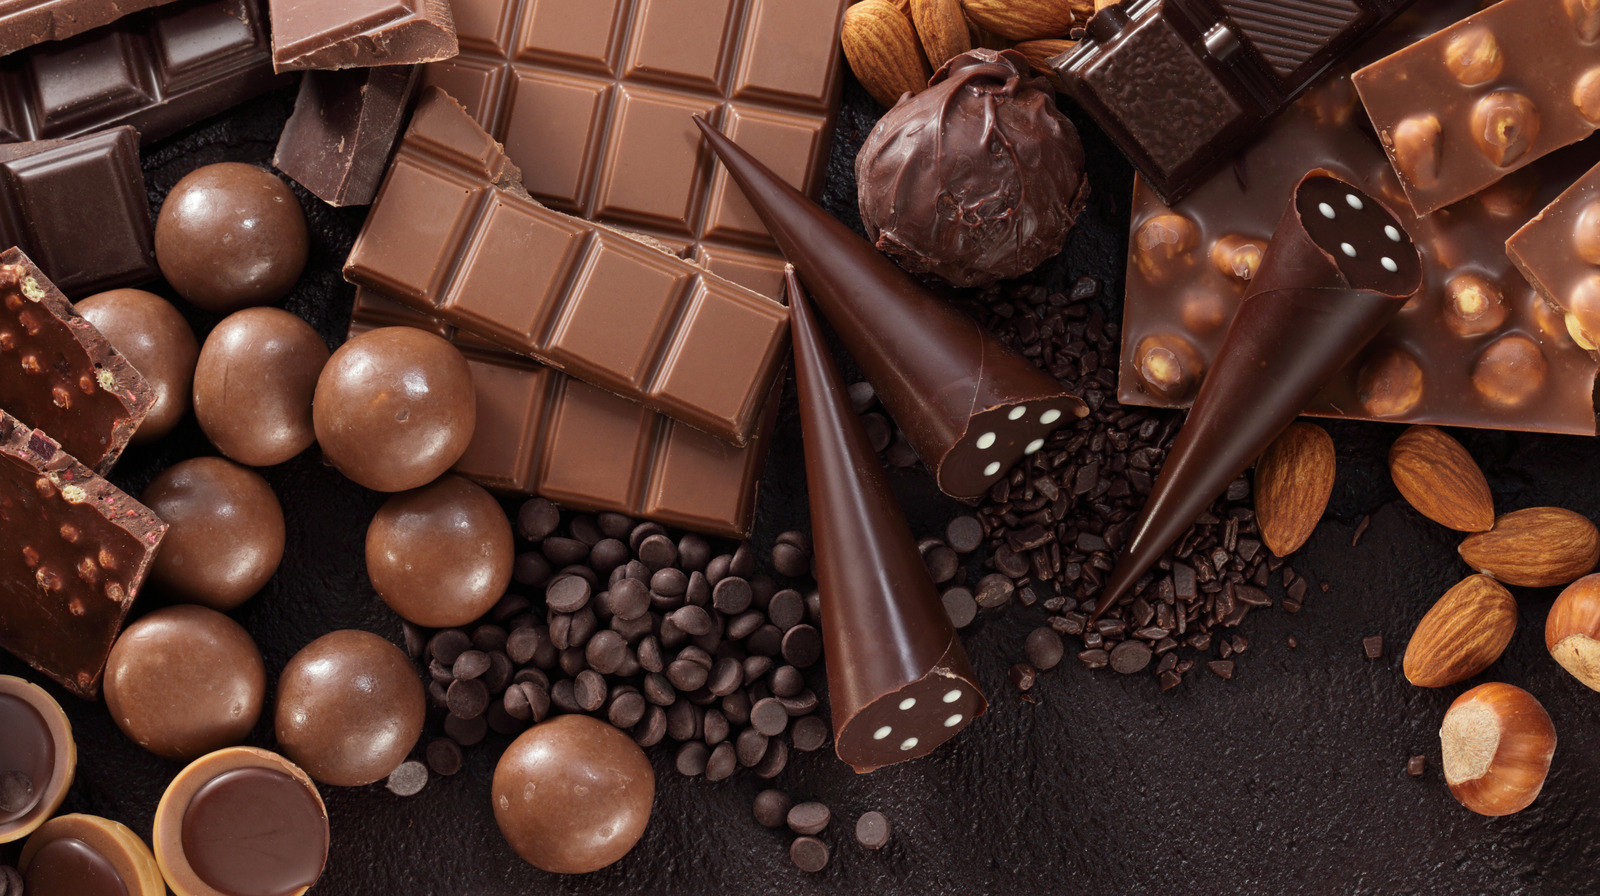 Can You Get Sick From Eating 2-Year-Old Chocolate?